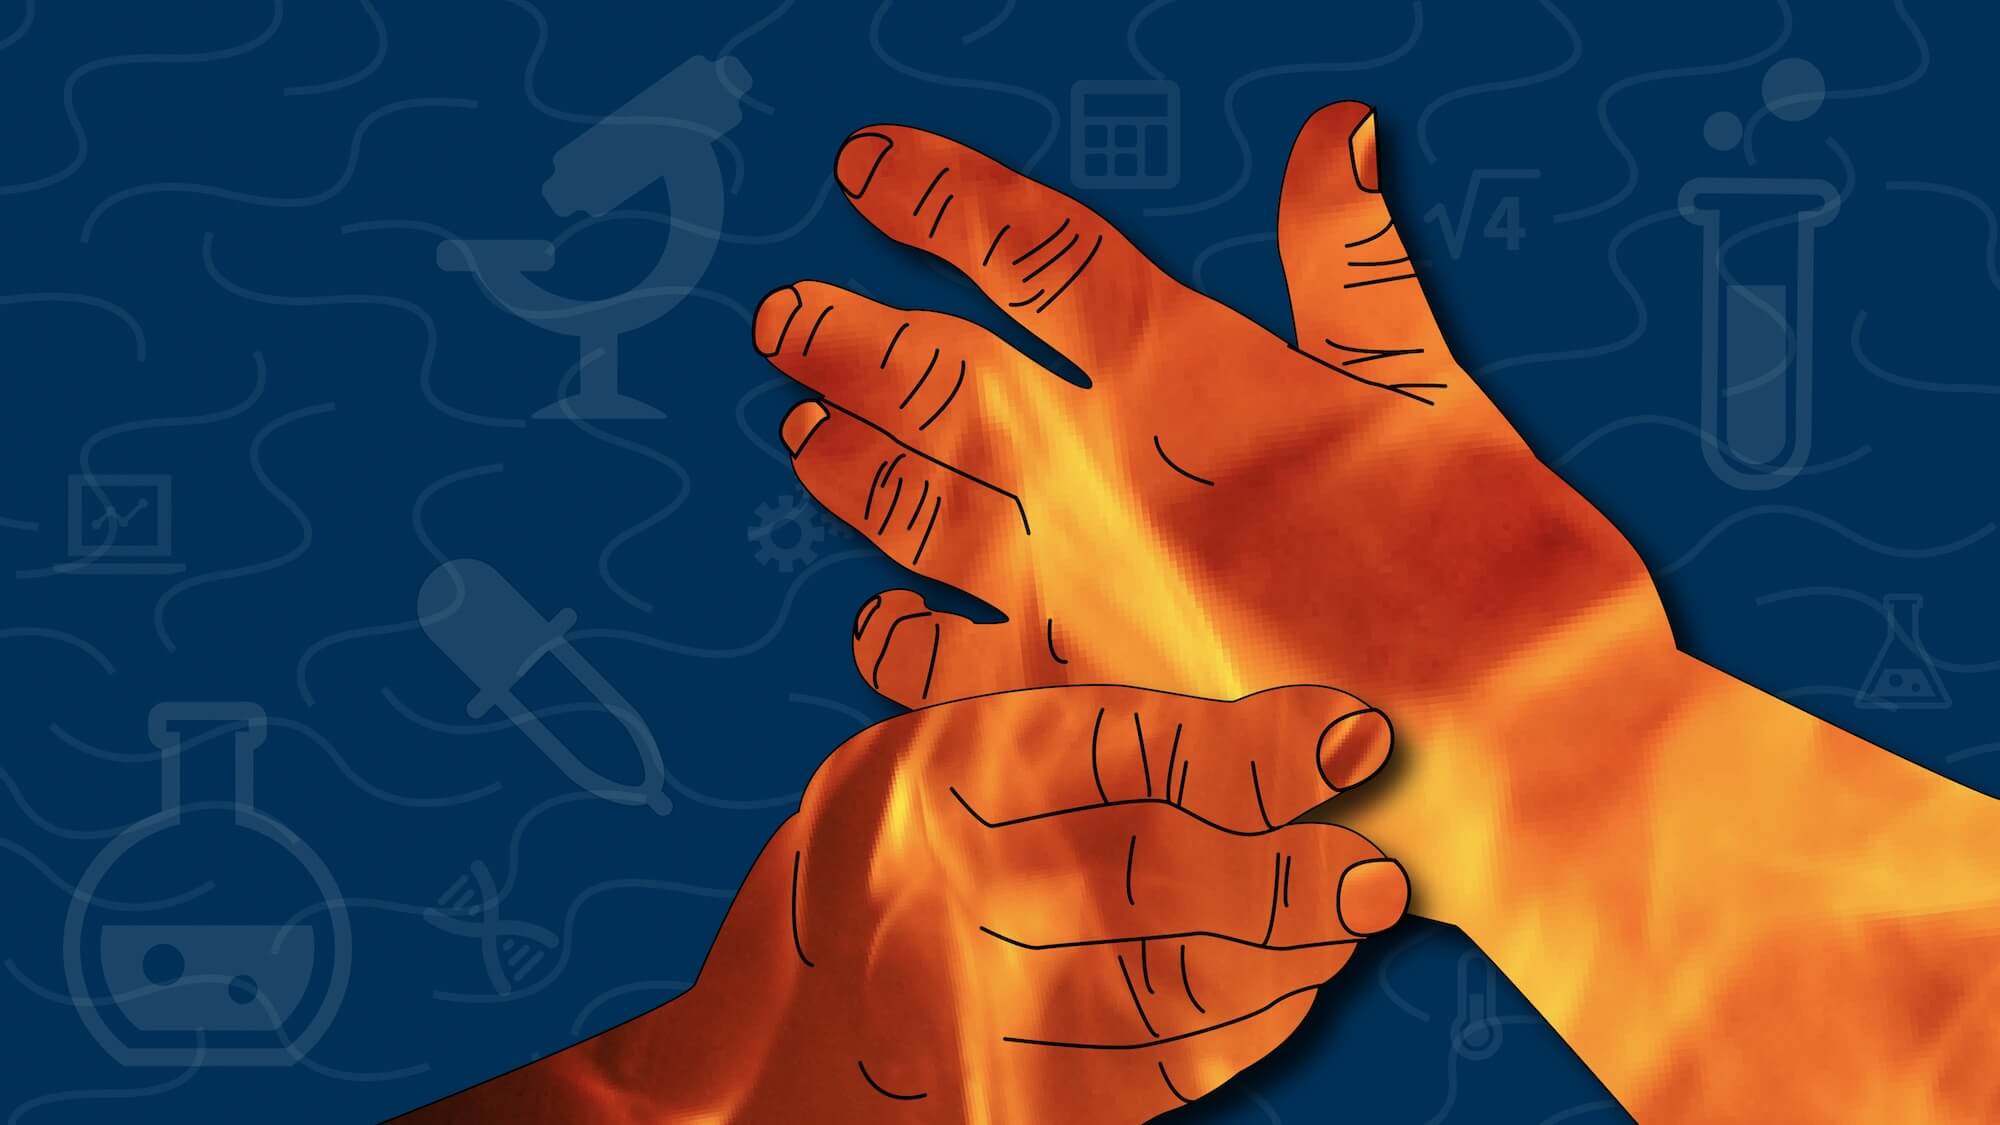 Illustration showing hands in fiery pain with RA surrounded by abstract science imagery